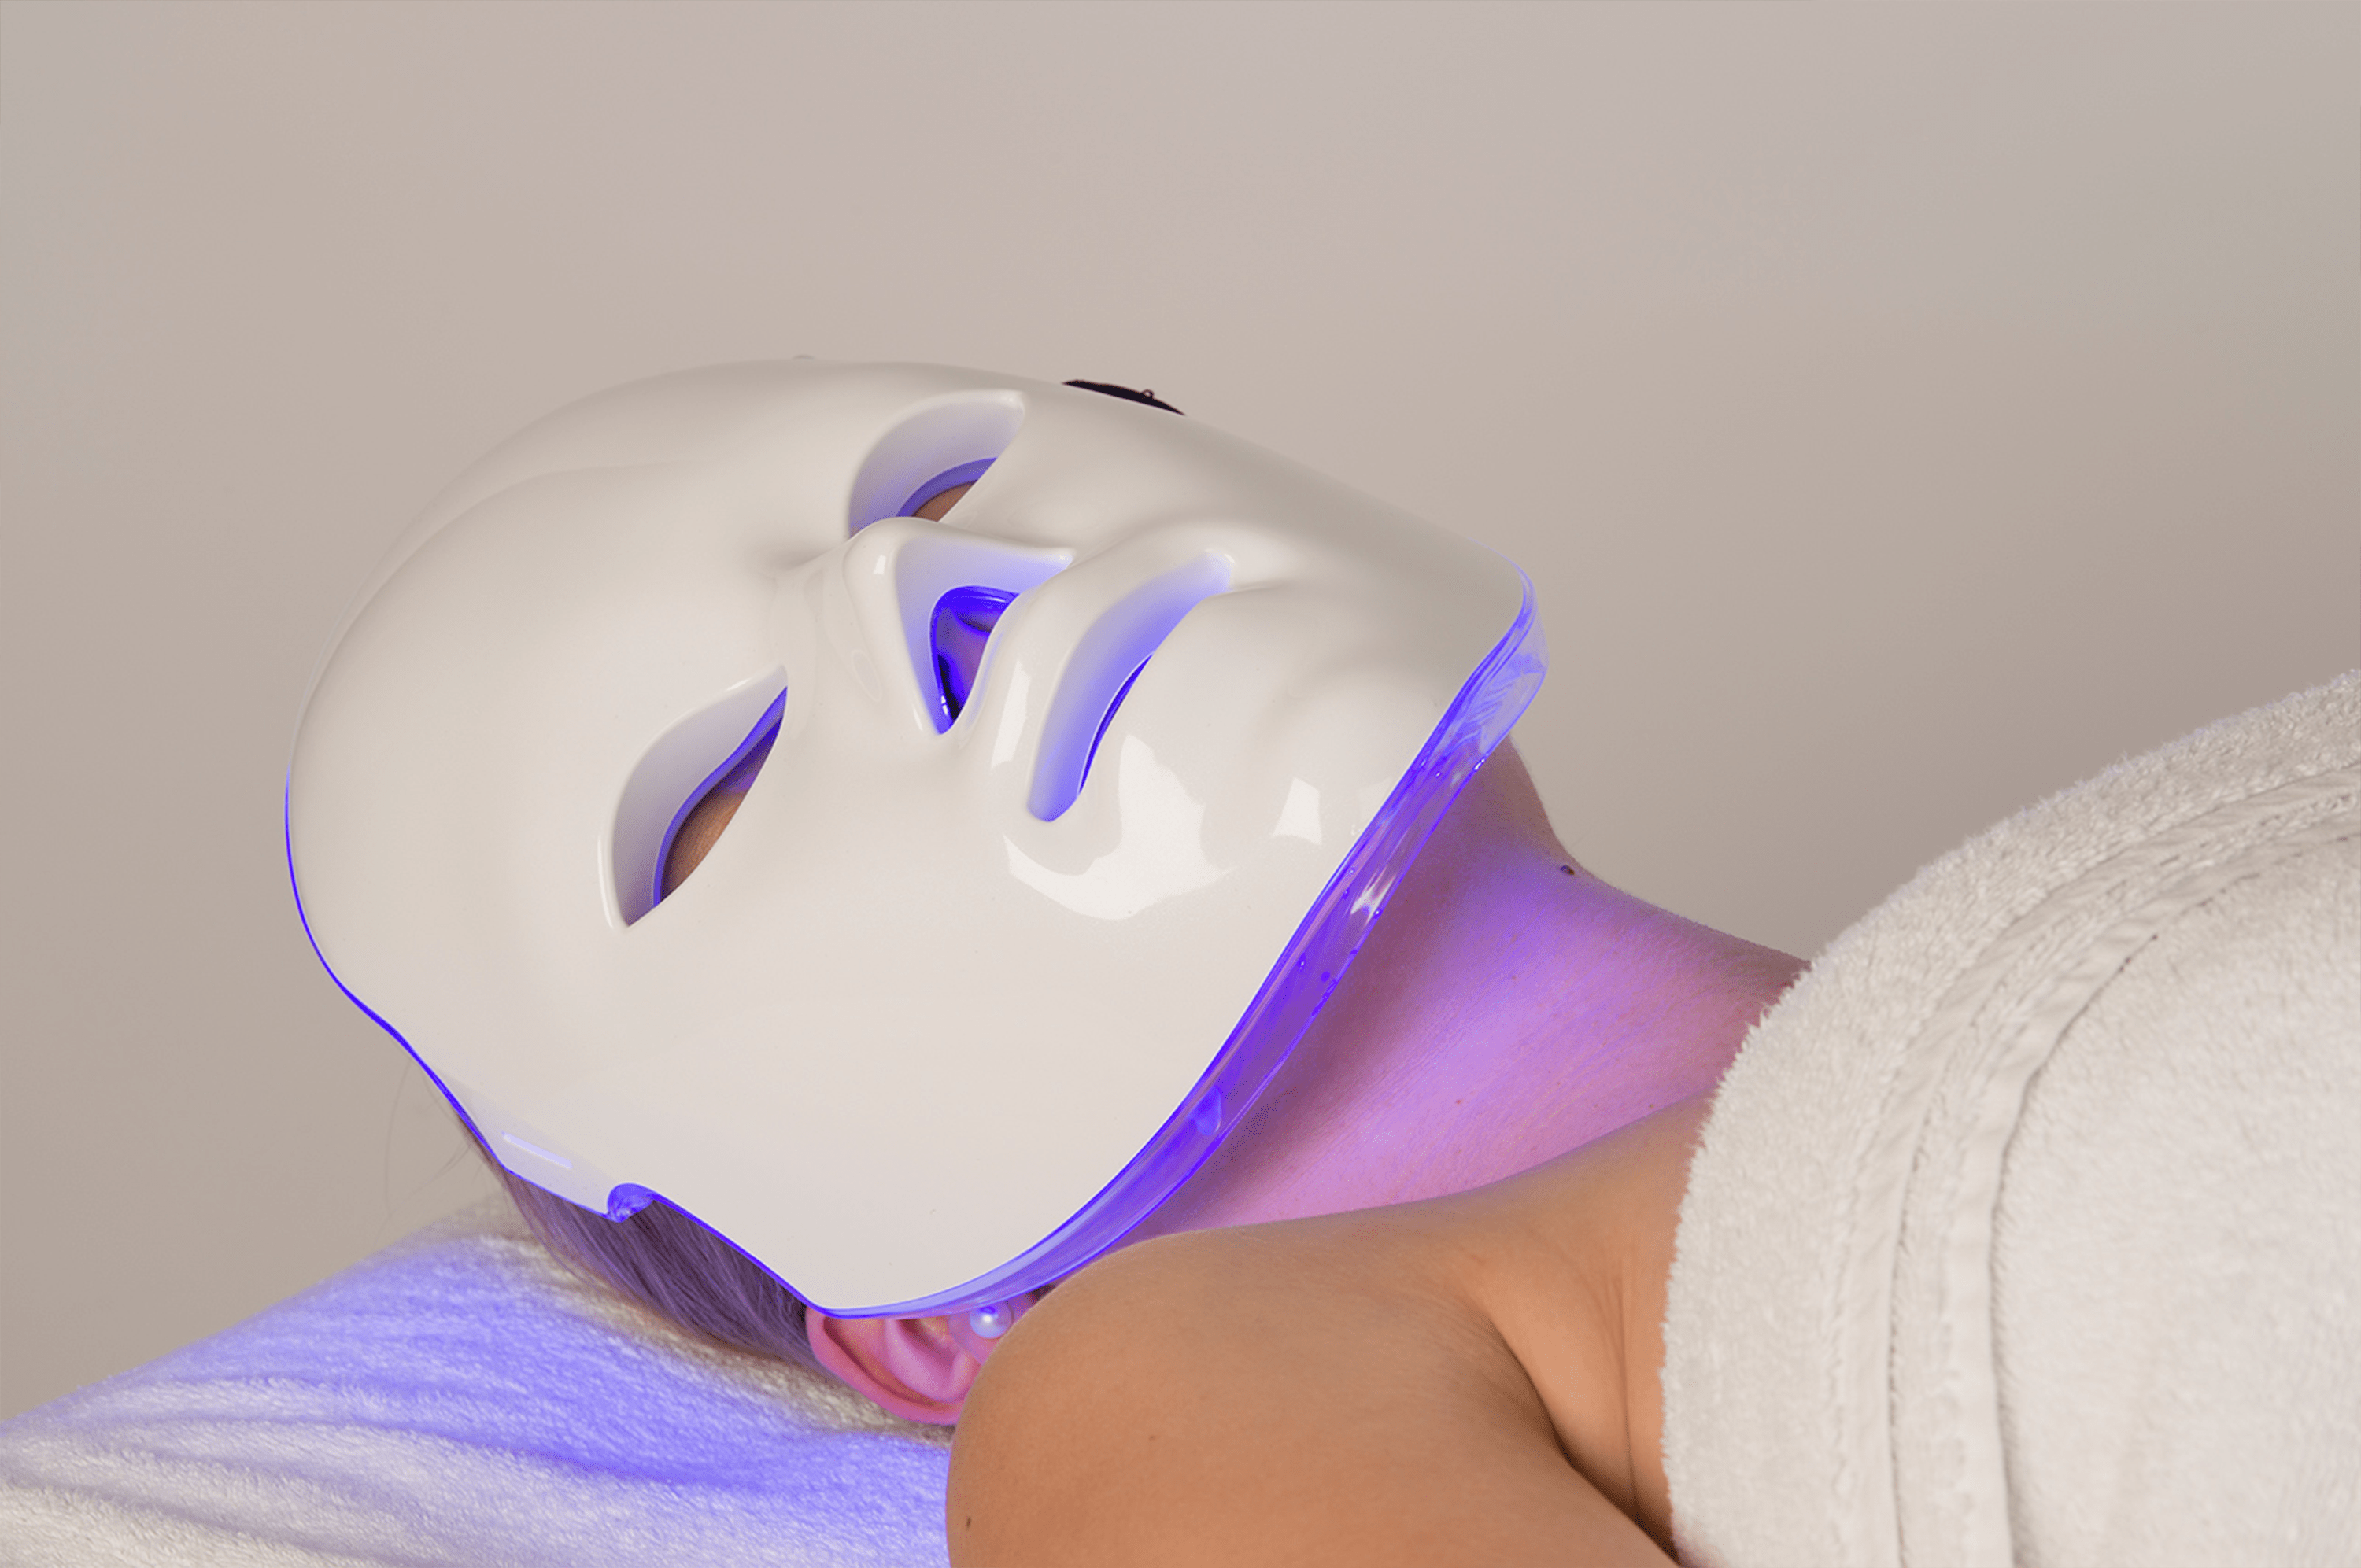 Acne photon light therapy taking place.